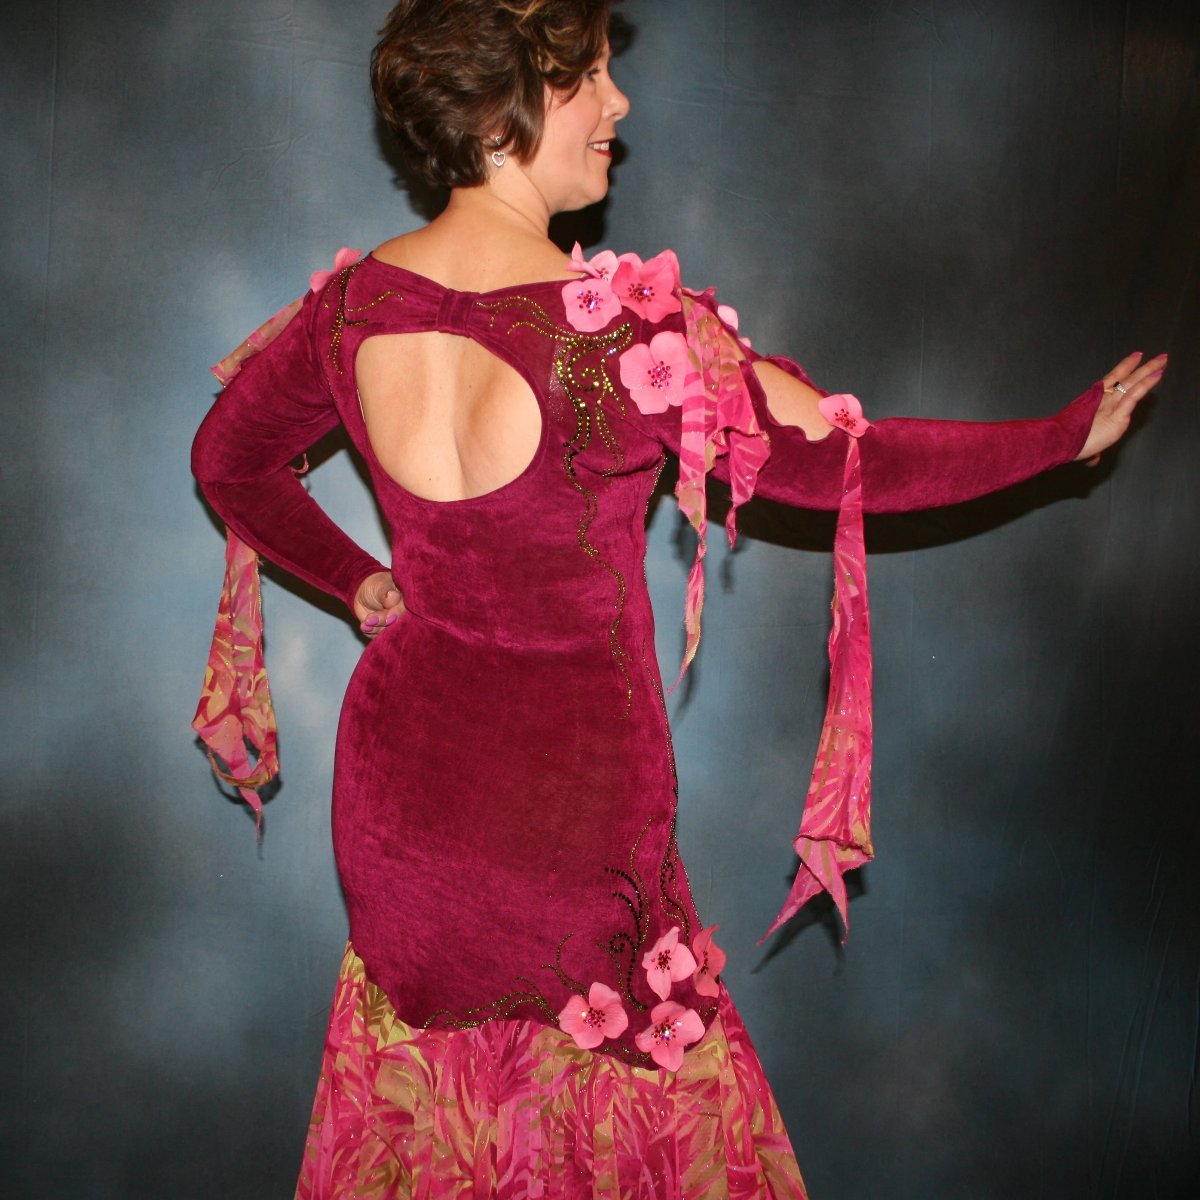 Crystal's Creations close up back view of Cranberry ballroom dress, created in luxurious cranberry solid slinky with yards of exotic print of cranberries, pinks & touch of greens. Embellishments of Swarovski adorned silk flowers plus detailed Swarovski rhinestone work